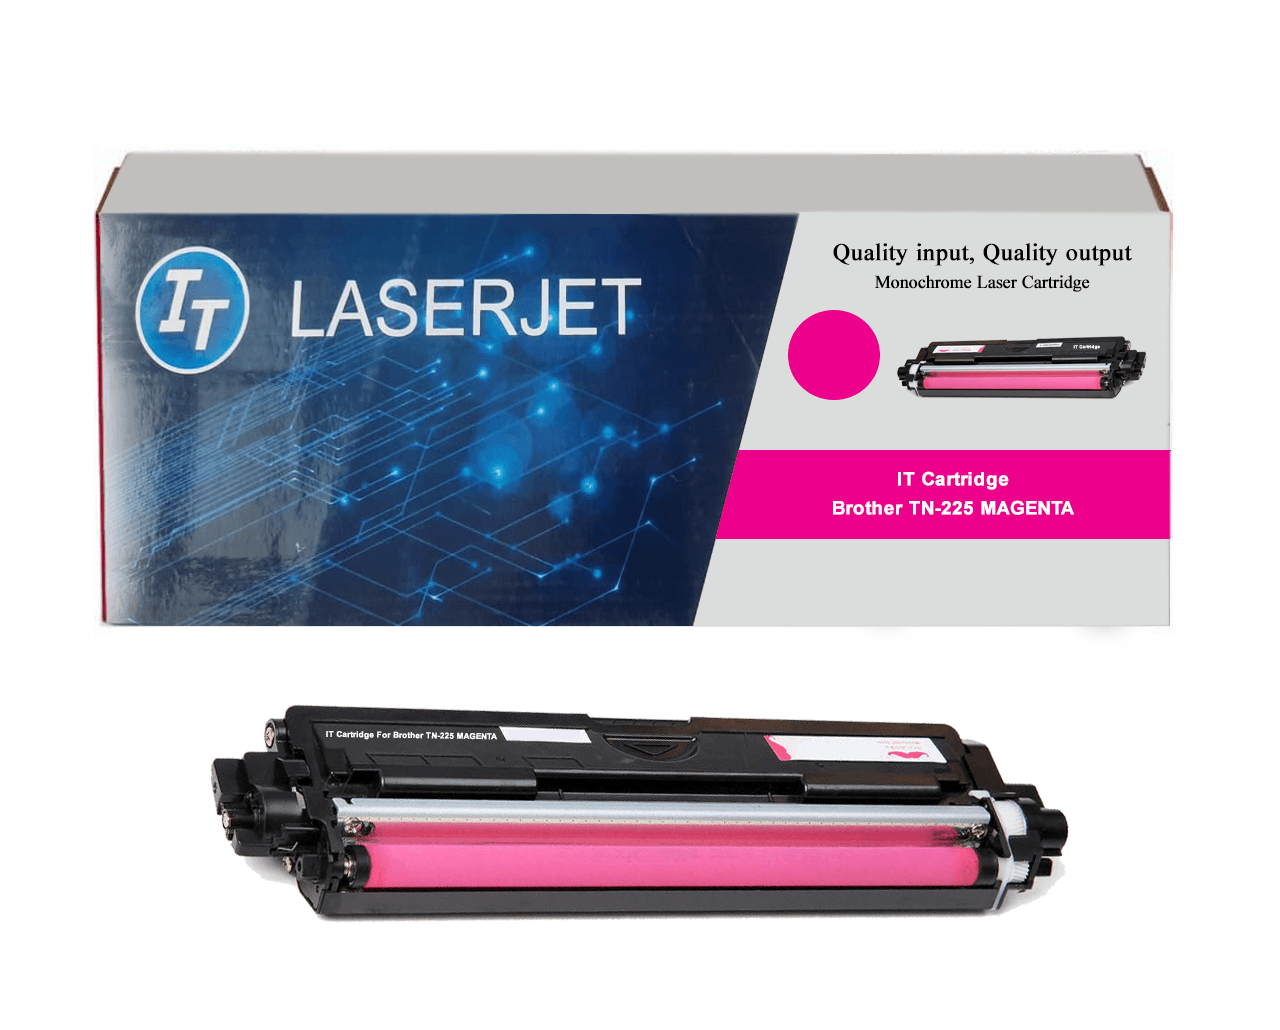 IT Toner Cartridge BROTHER TN-225 MAGENTO (6).png